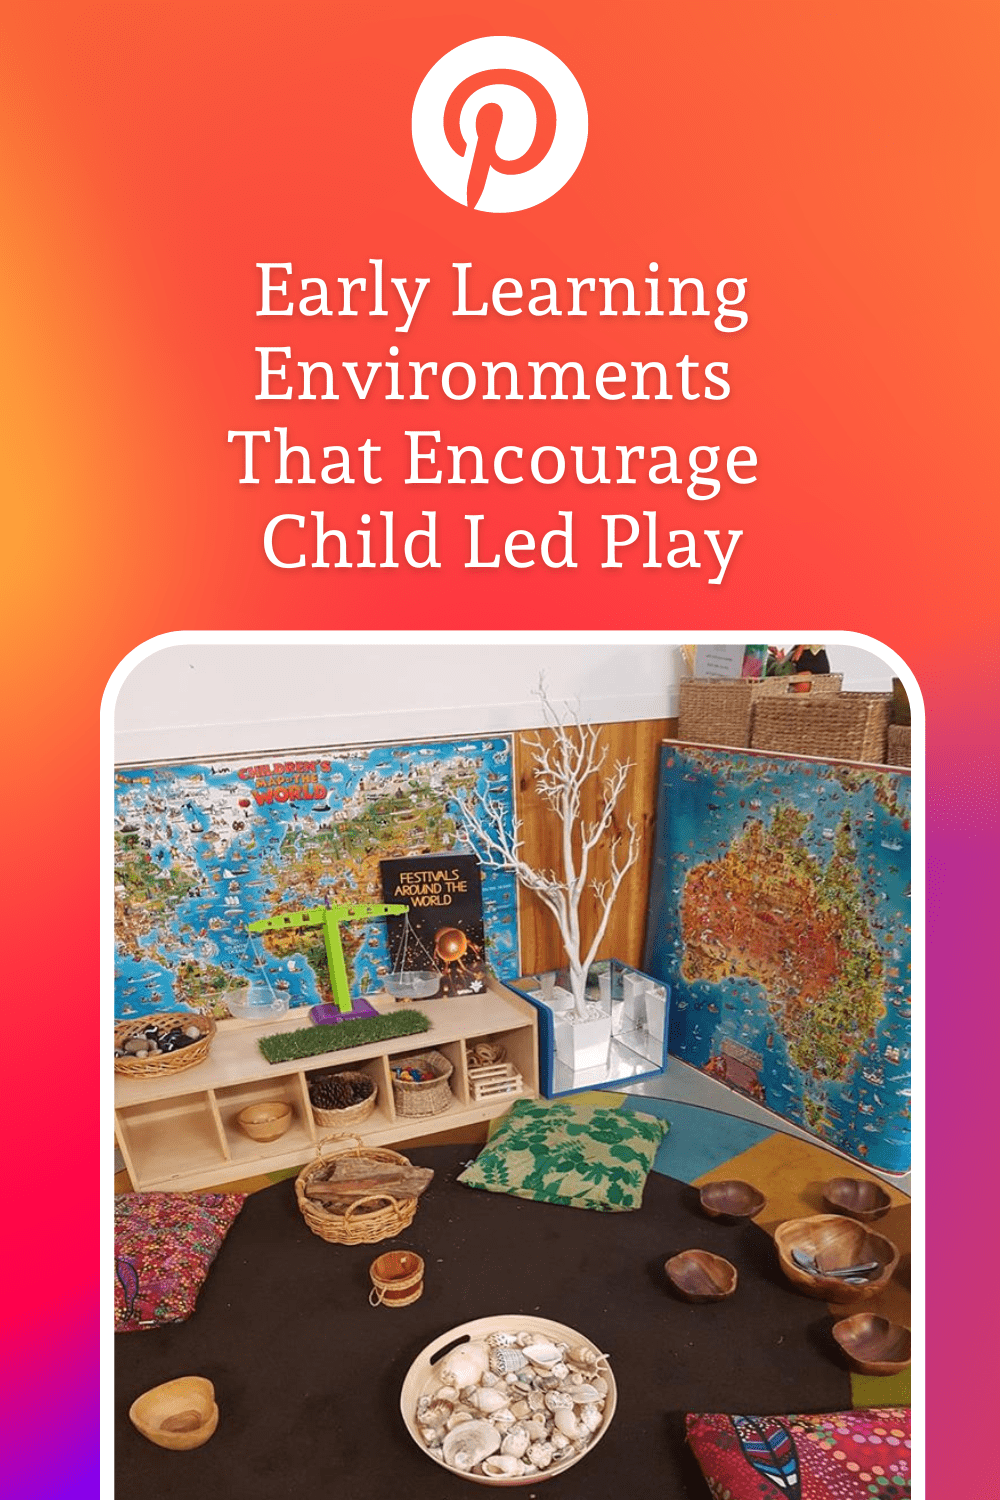 The Empowered Educator gives you examples & inspiration from other early childhood teachers & educators to encourage child-led play in your early learning environment.